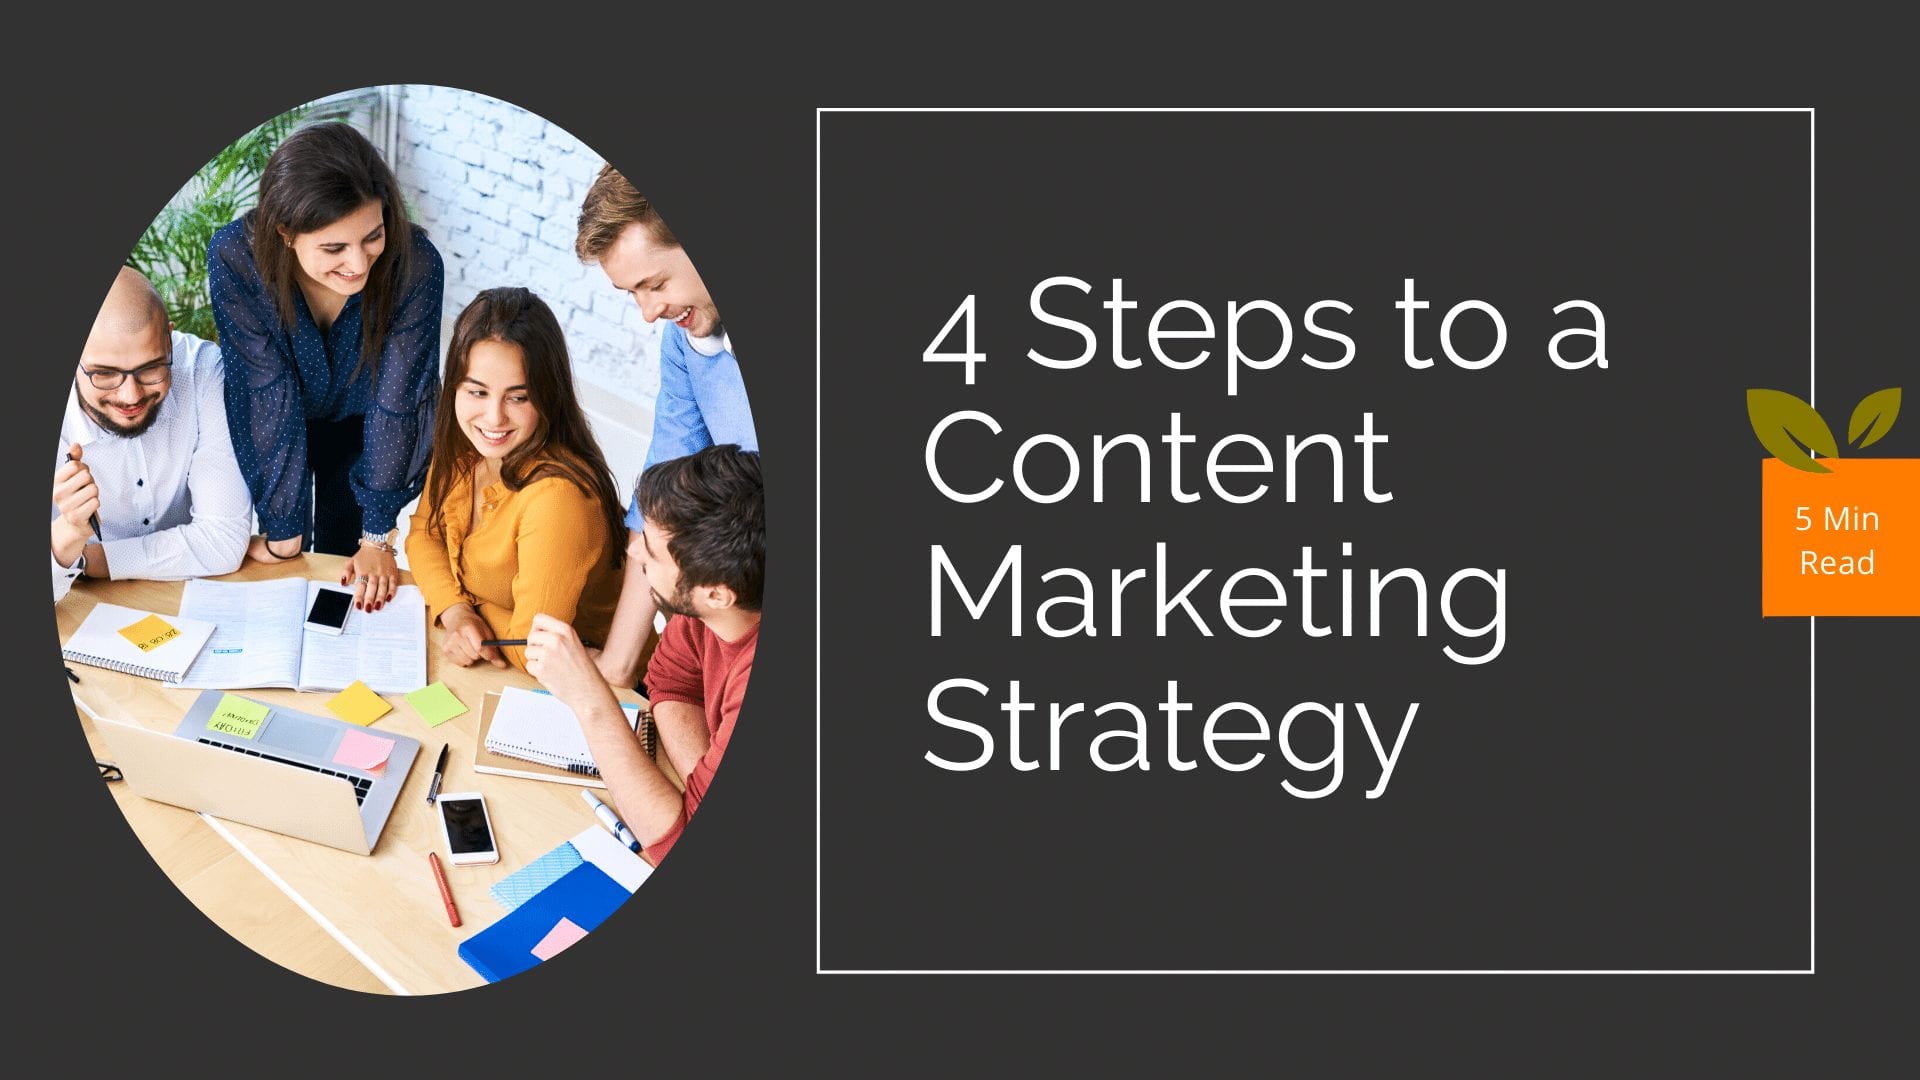 4 Easy Steps to a Content Marketing Strategy